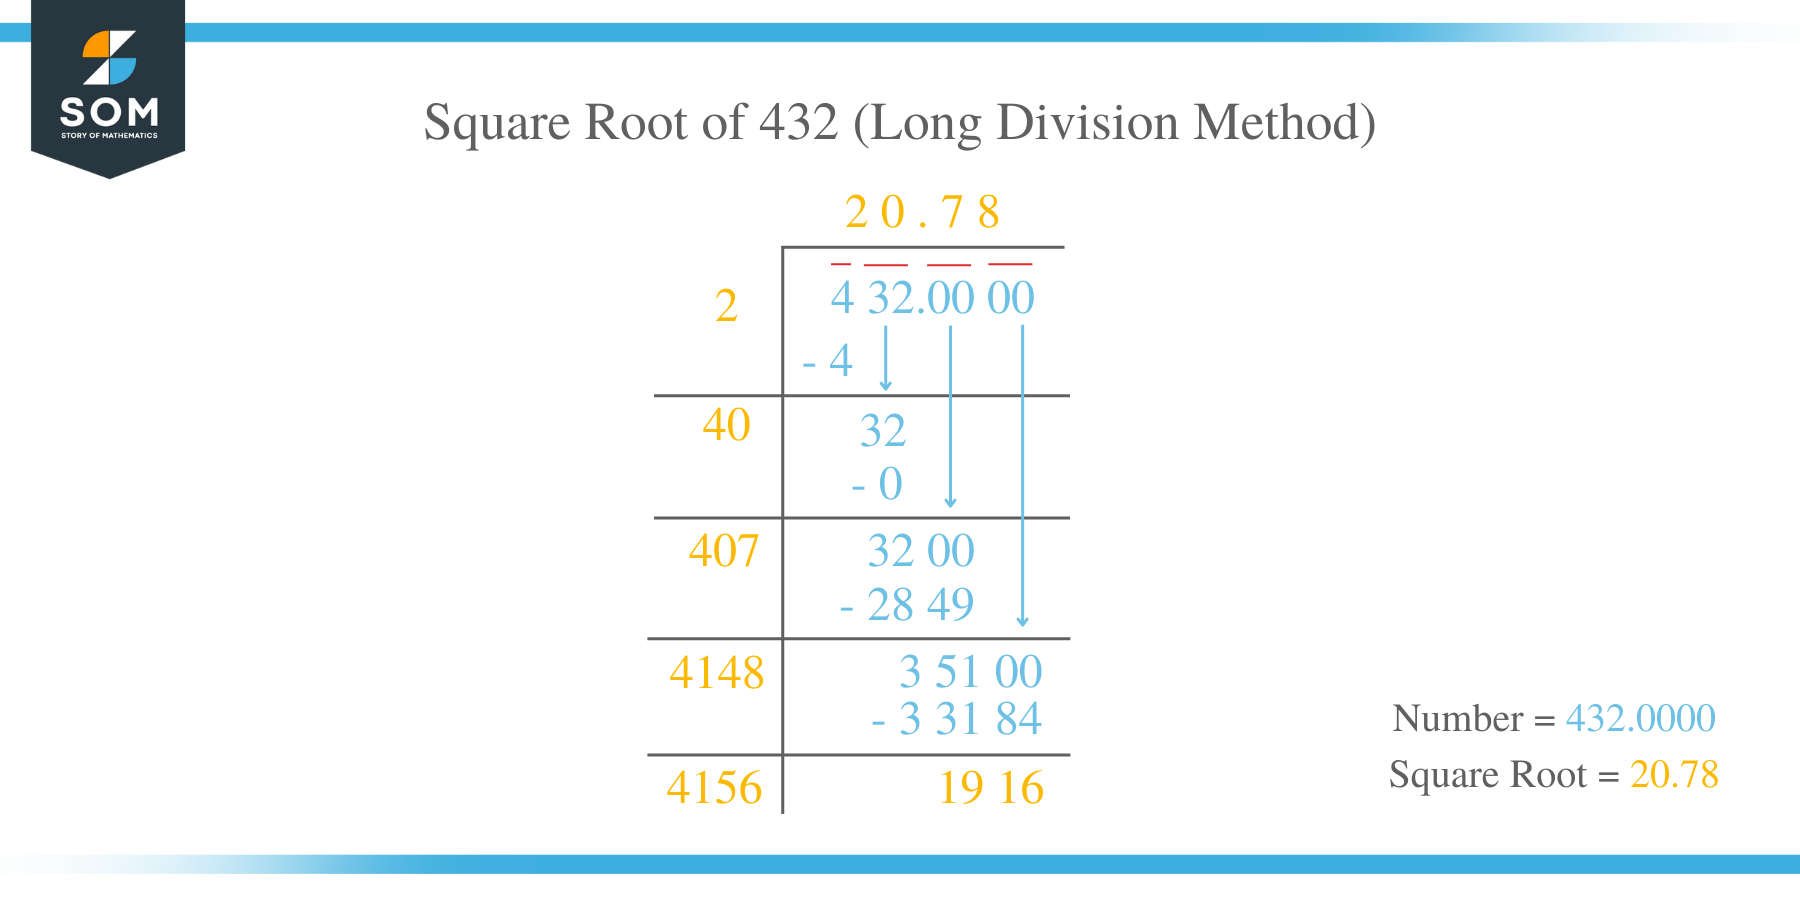 Square Root of 432 by Long Division Method